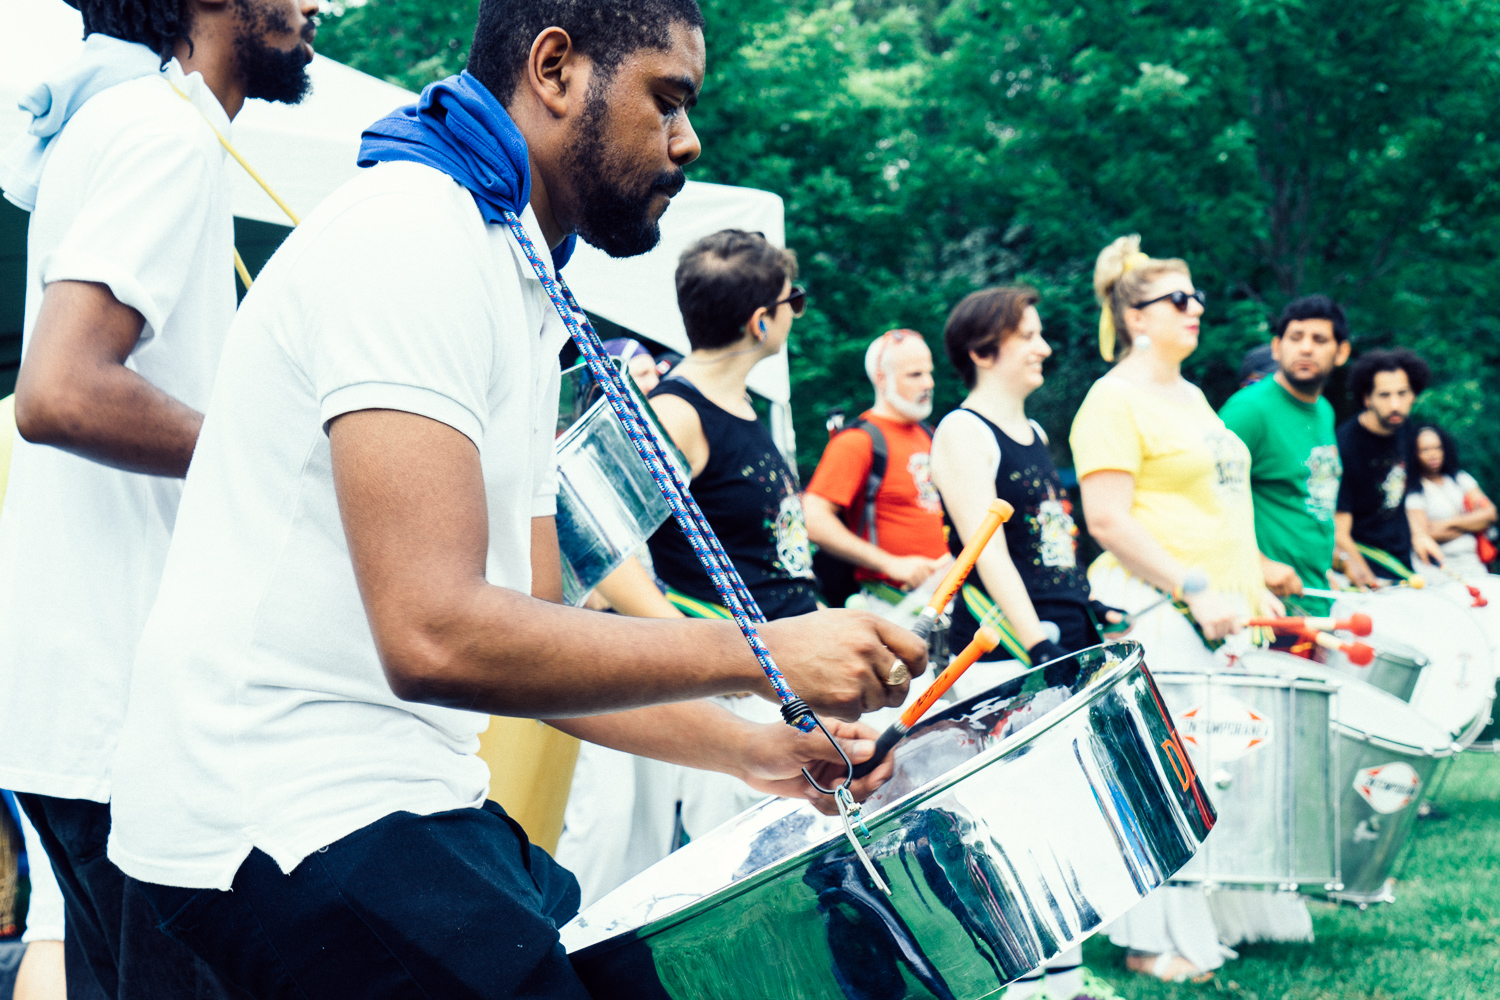 A horizontal line of people play steel drums as they march over the grass